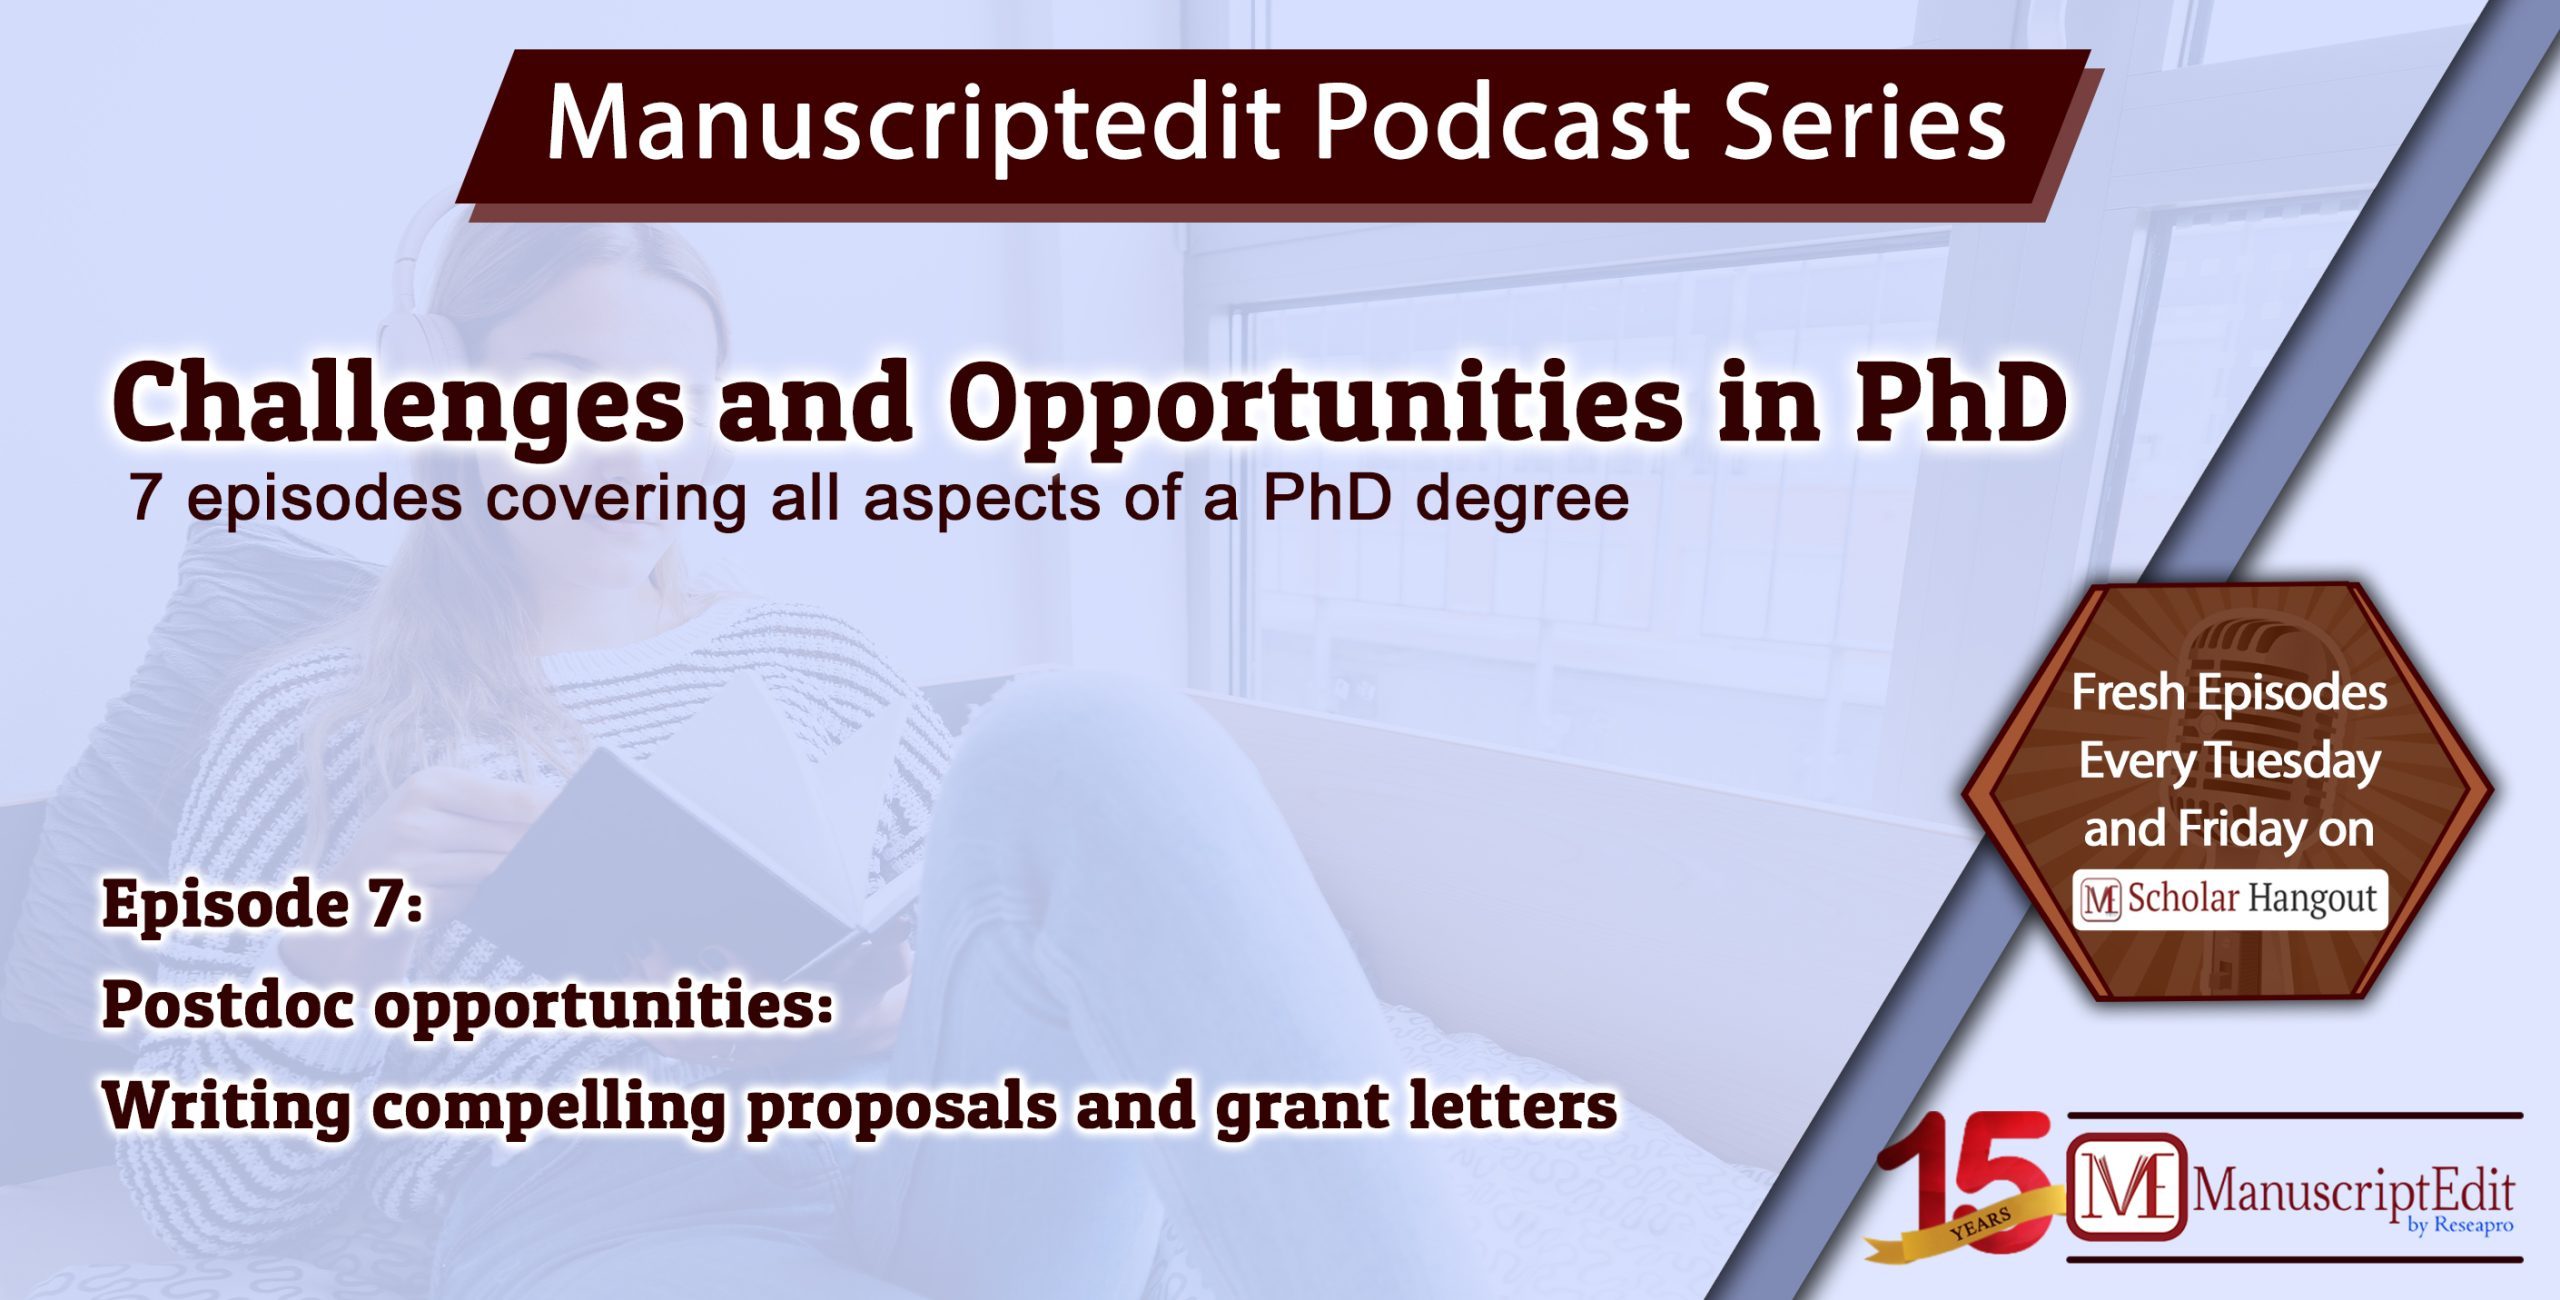 Episode 7: Postdoc opportunities: Writing compelling proposals and grant letters